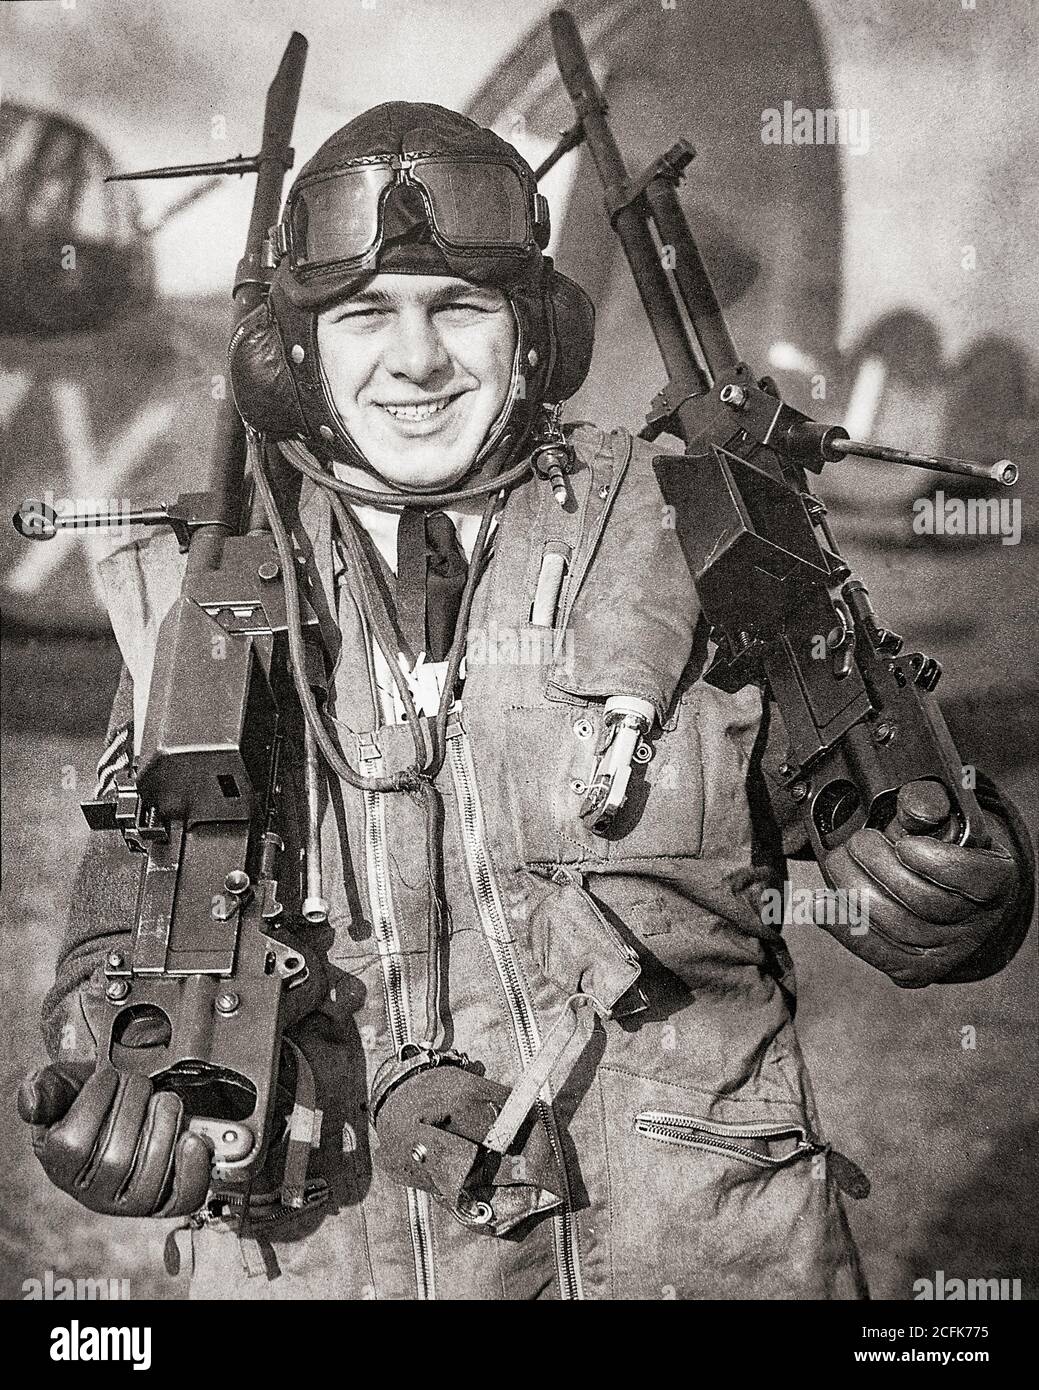 Air crew gunner with a pair of 0.303 Vickers K machine guns, aka Vickers Gas Operated (Vickers G.O.). A rapid-firing machine gun developed for use in heavy bombers it gave the  high rate of fire  needed for the small period of time when the gunner would be able to fire at an attacking aircraft. Stock Photo